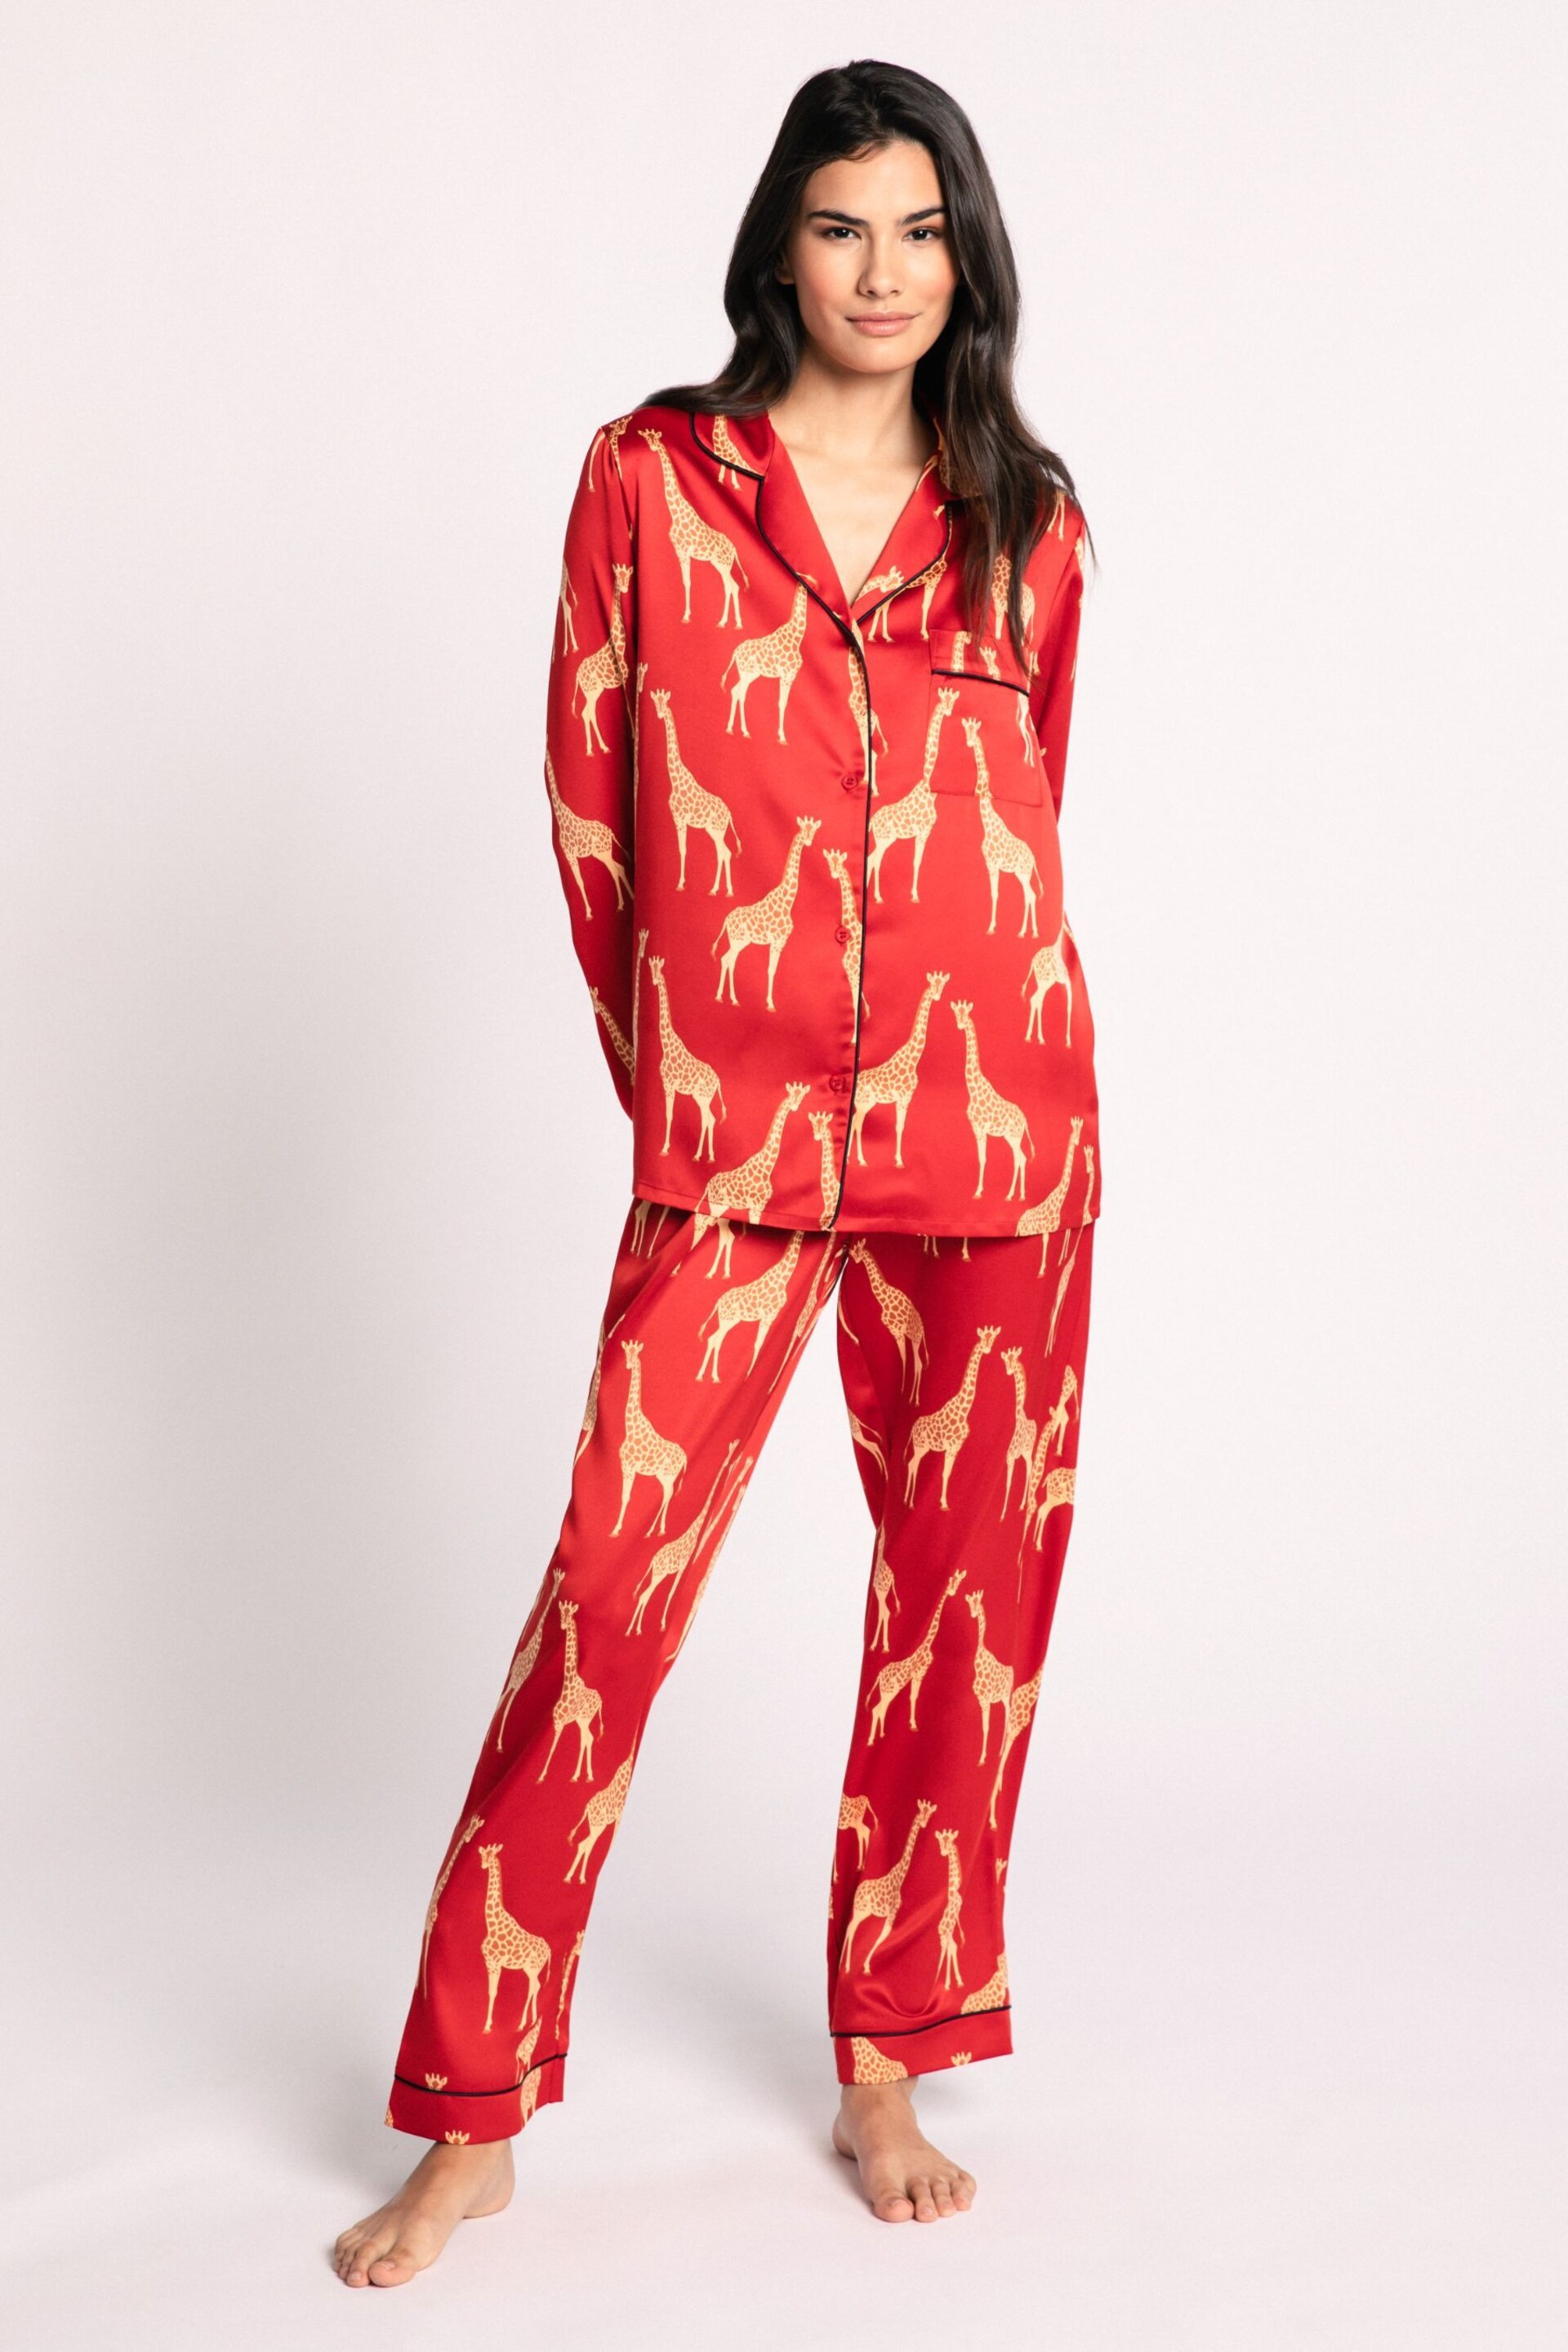 Chelsea Peers Red Satin Button Up Long Pyjamas Set - Image 5 of 5